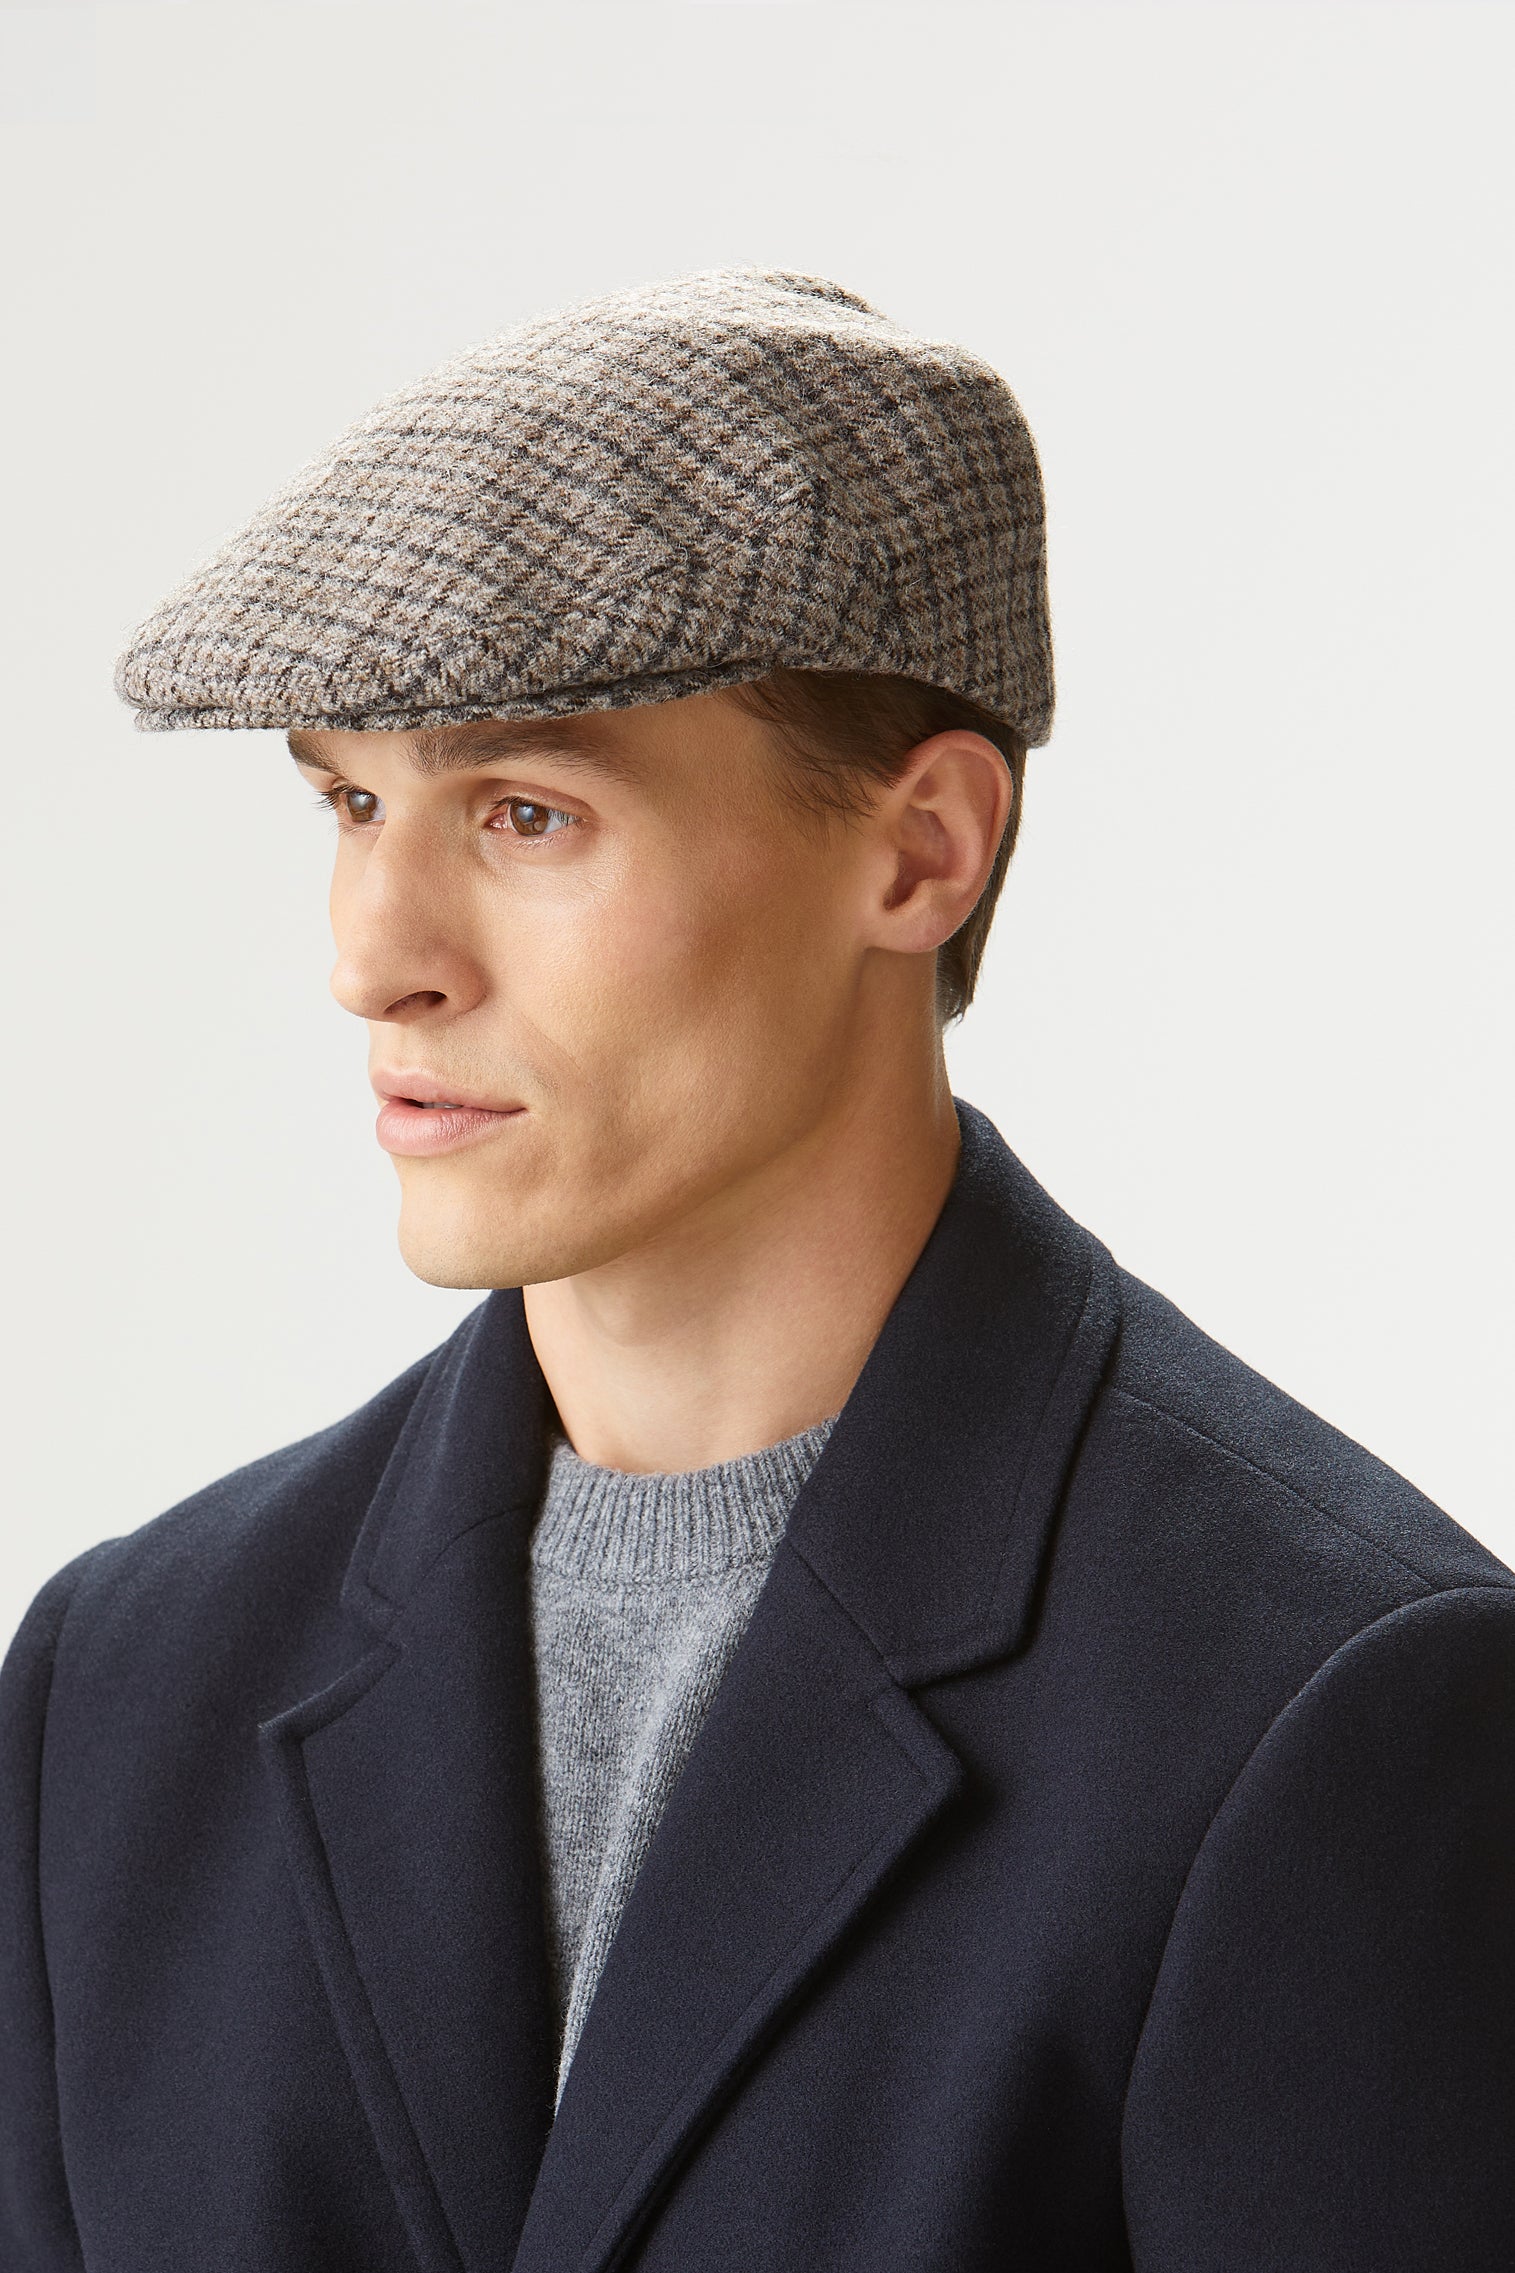 Gill Check Flat Cap - Hats for Oval Face Shapes - Lock & Co. Hatters London UK